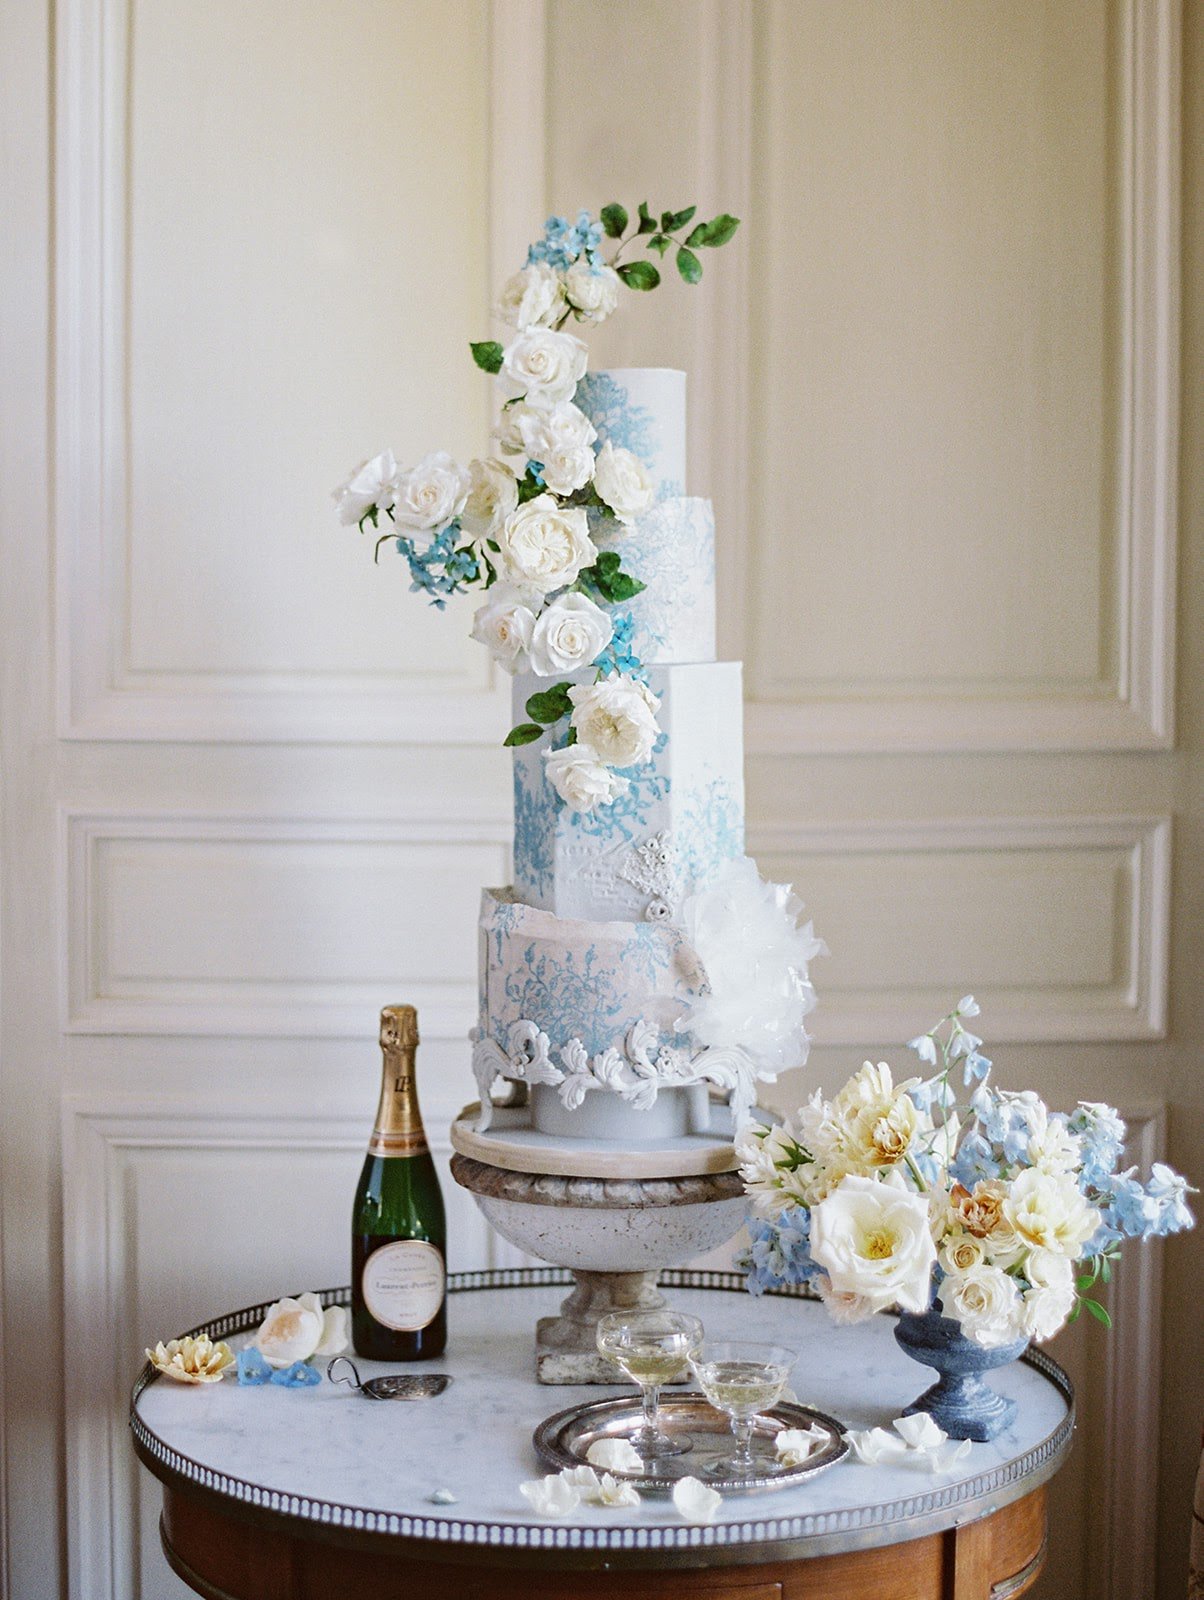 A blue and white  wedding cake, decorated with roses, ready to serve on a table in a Chateau venue.